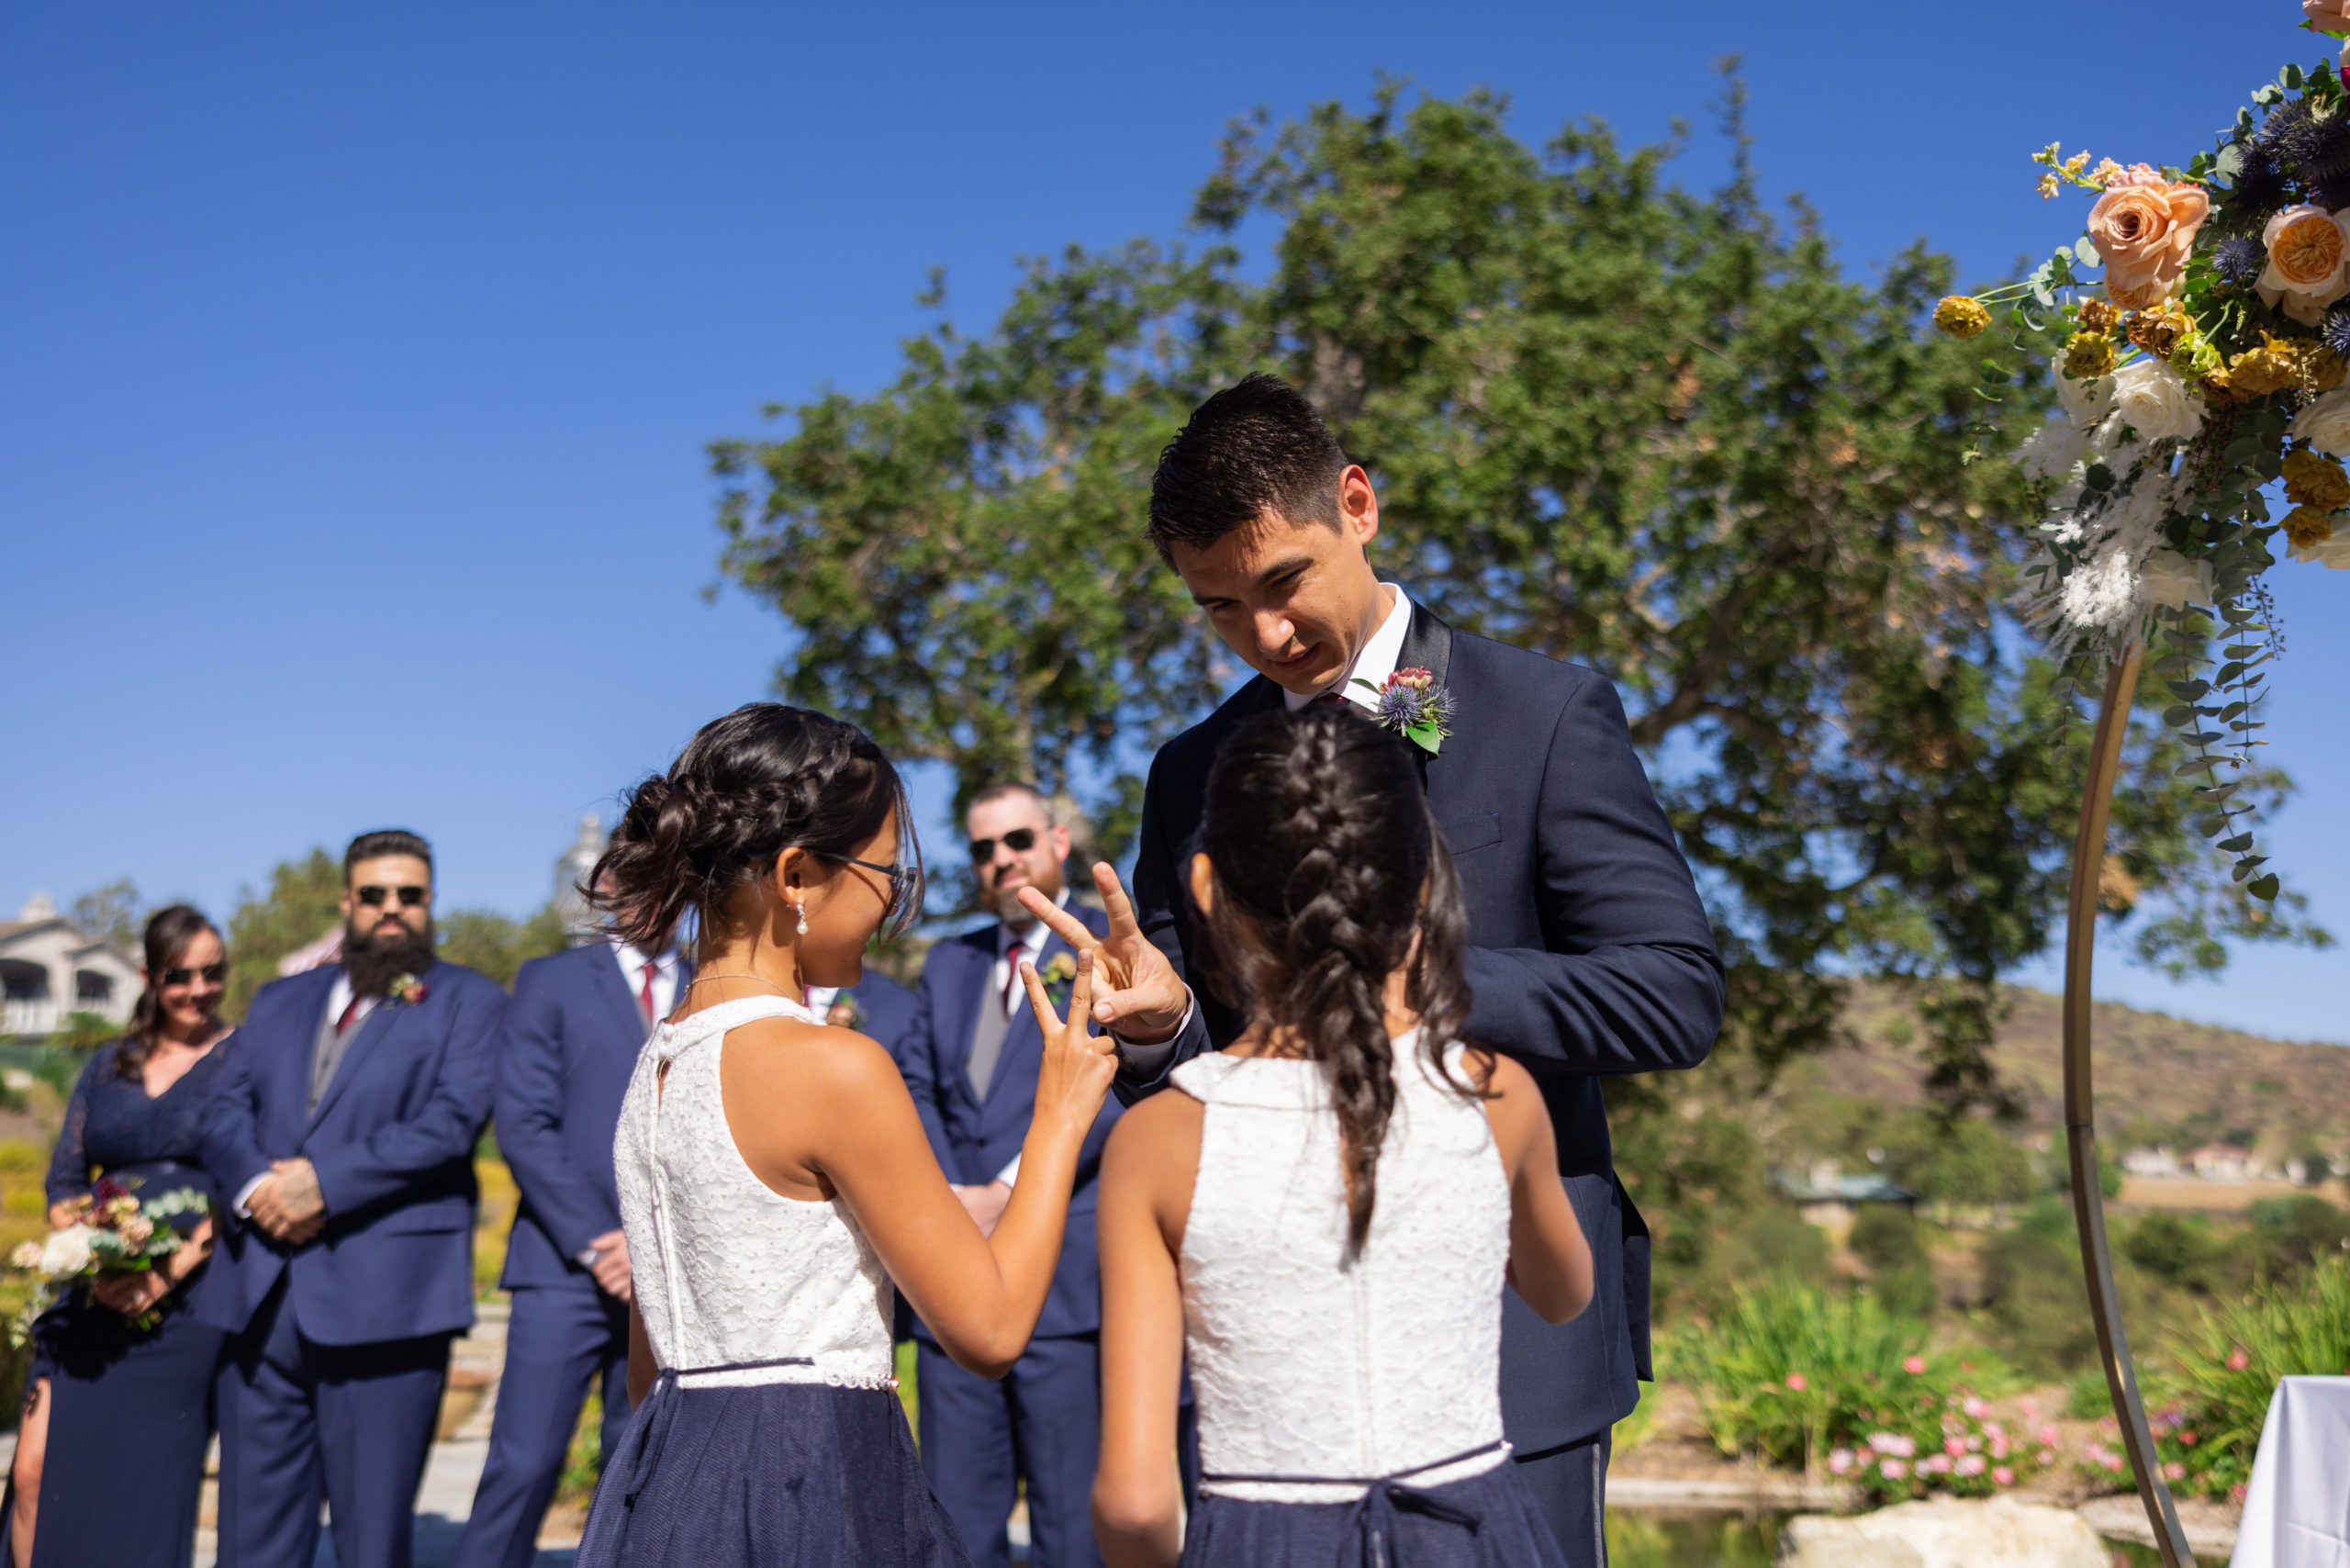 flower girls give groom peace sign